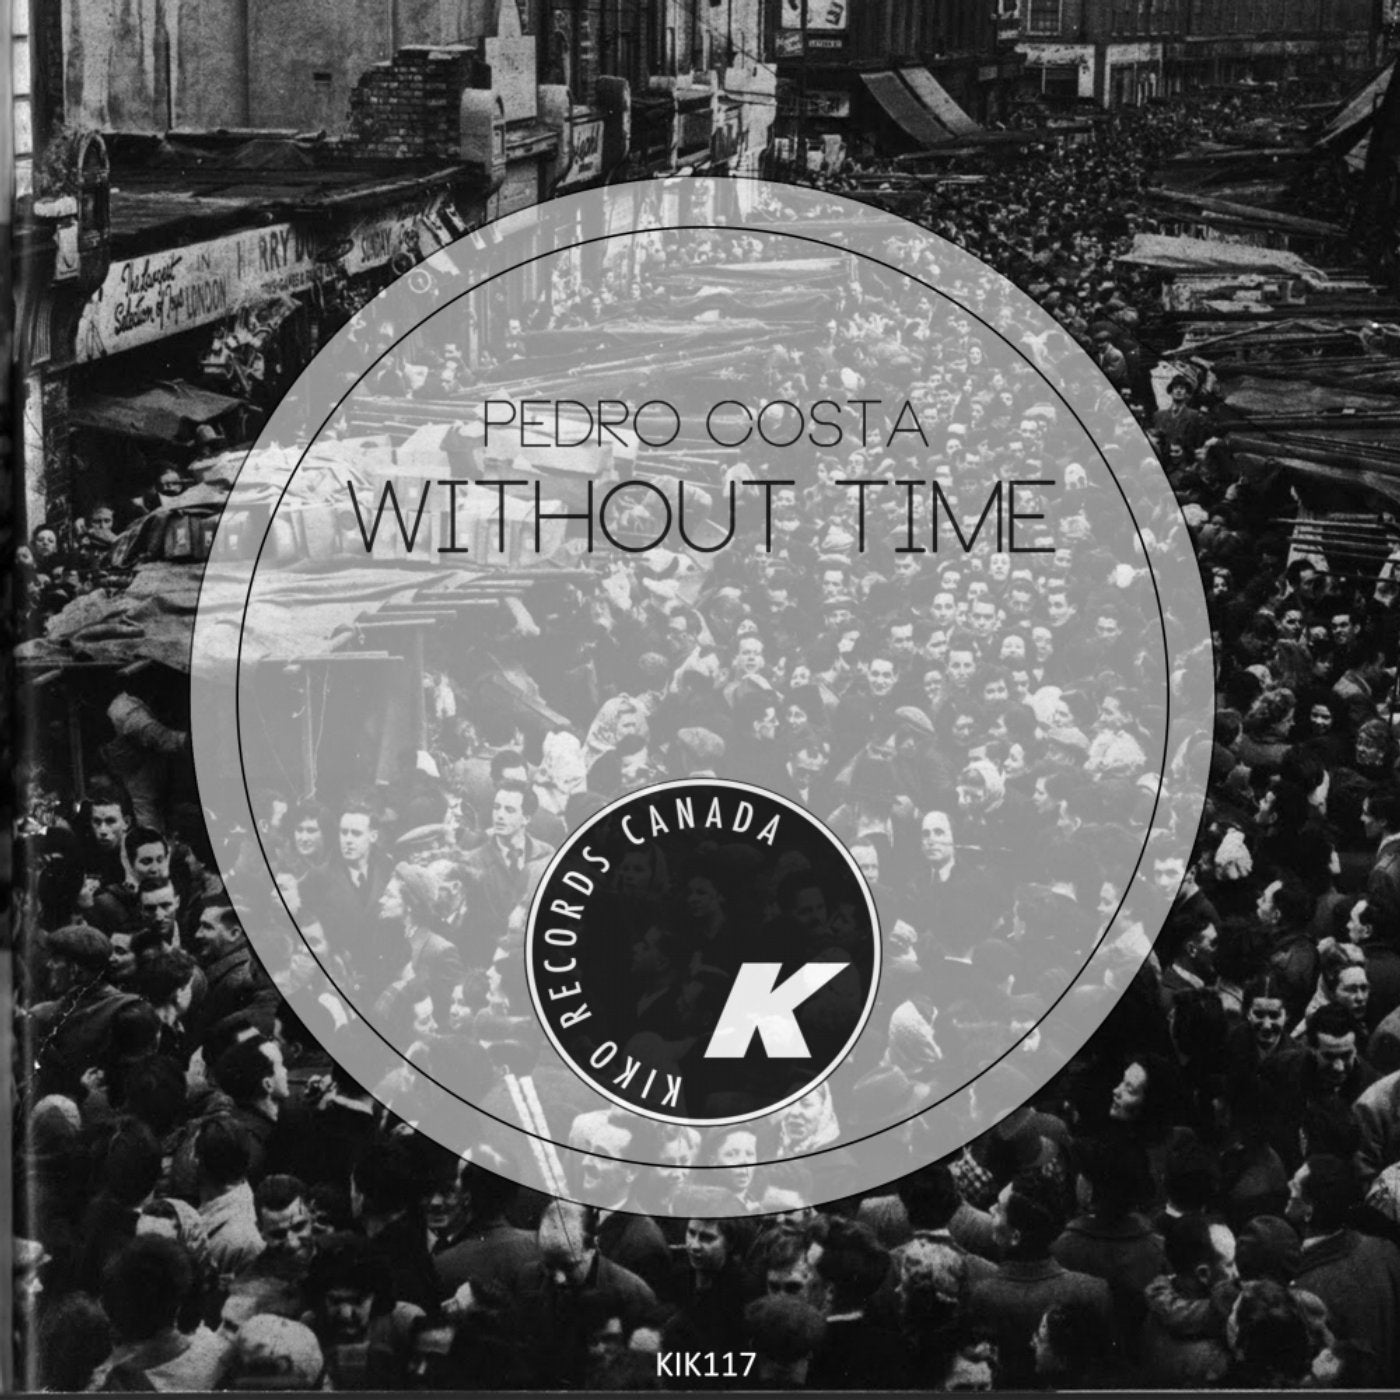 Without Time